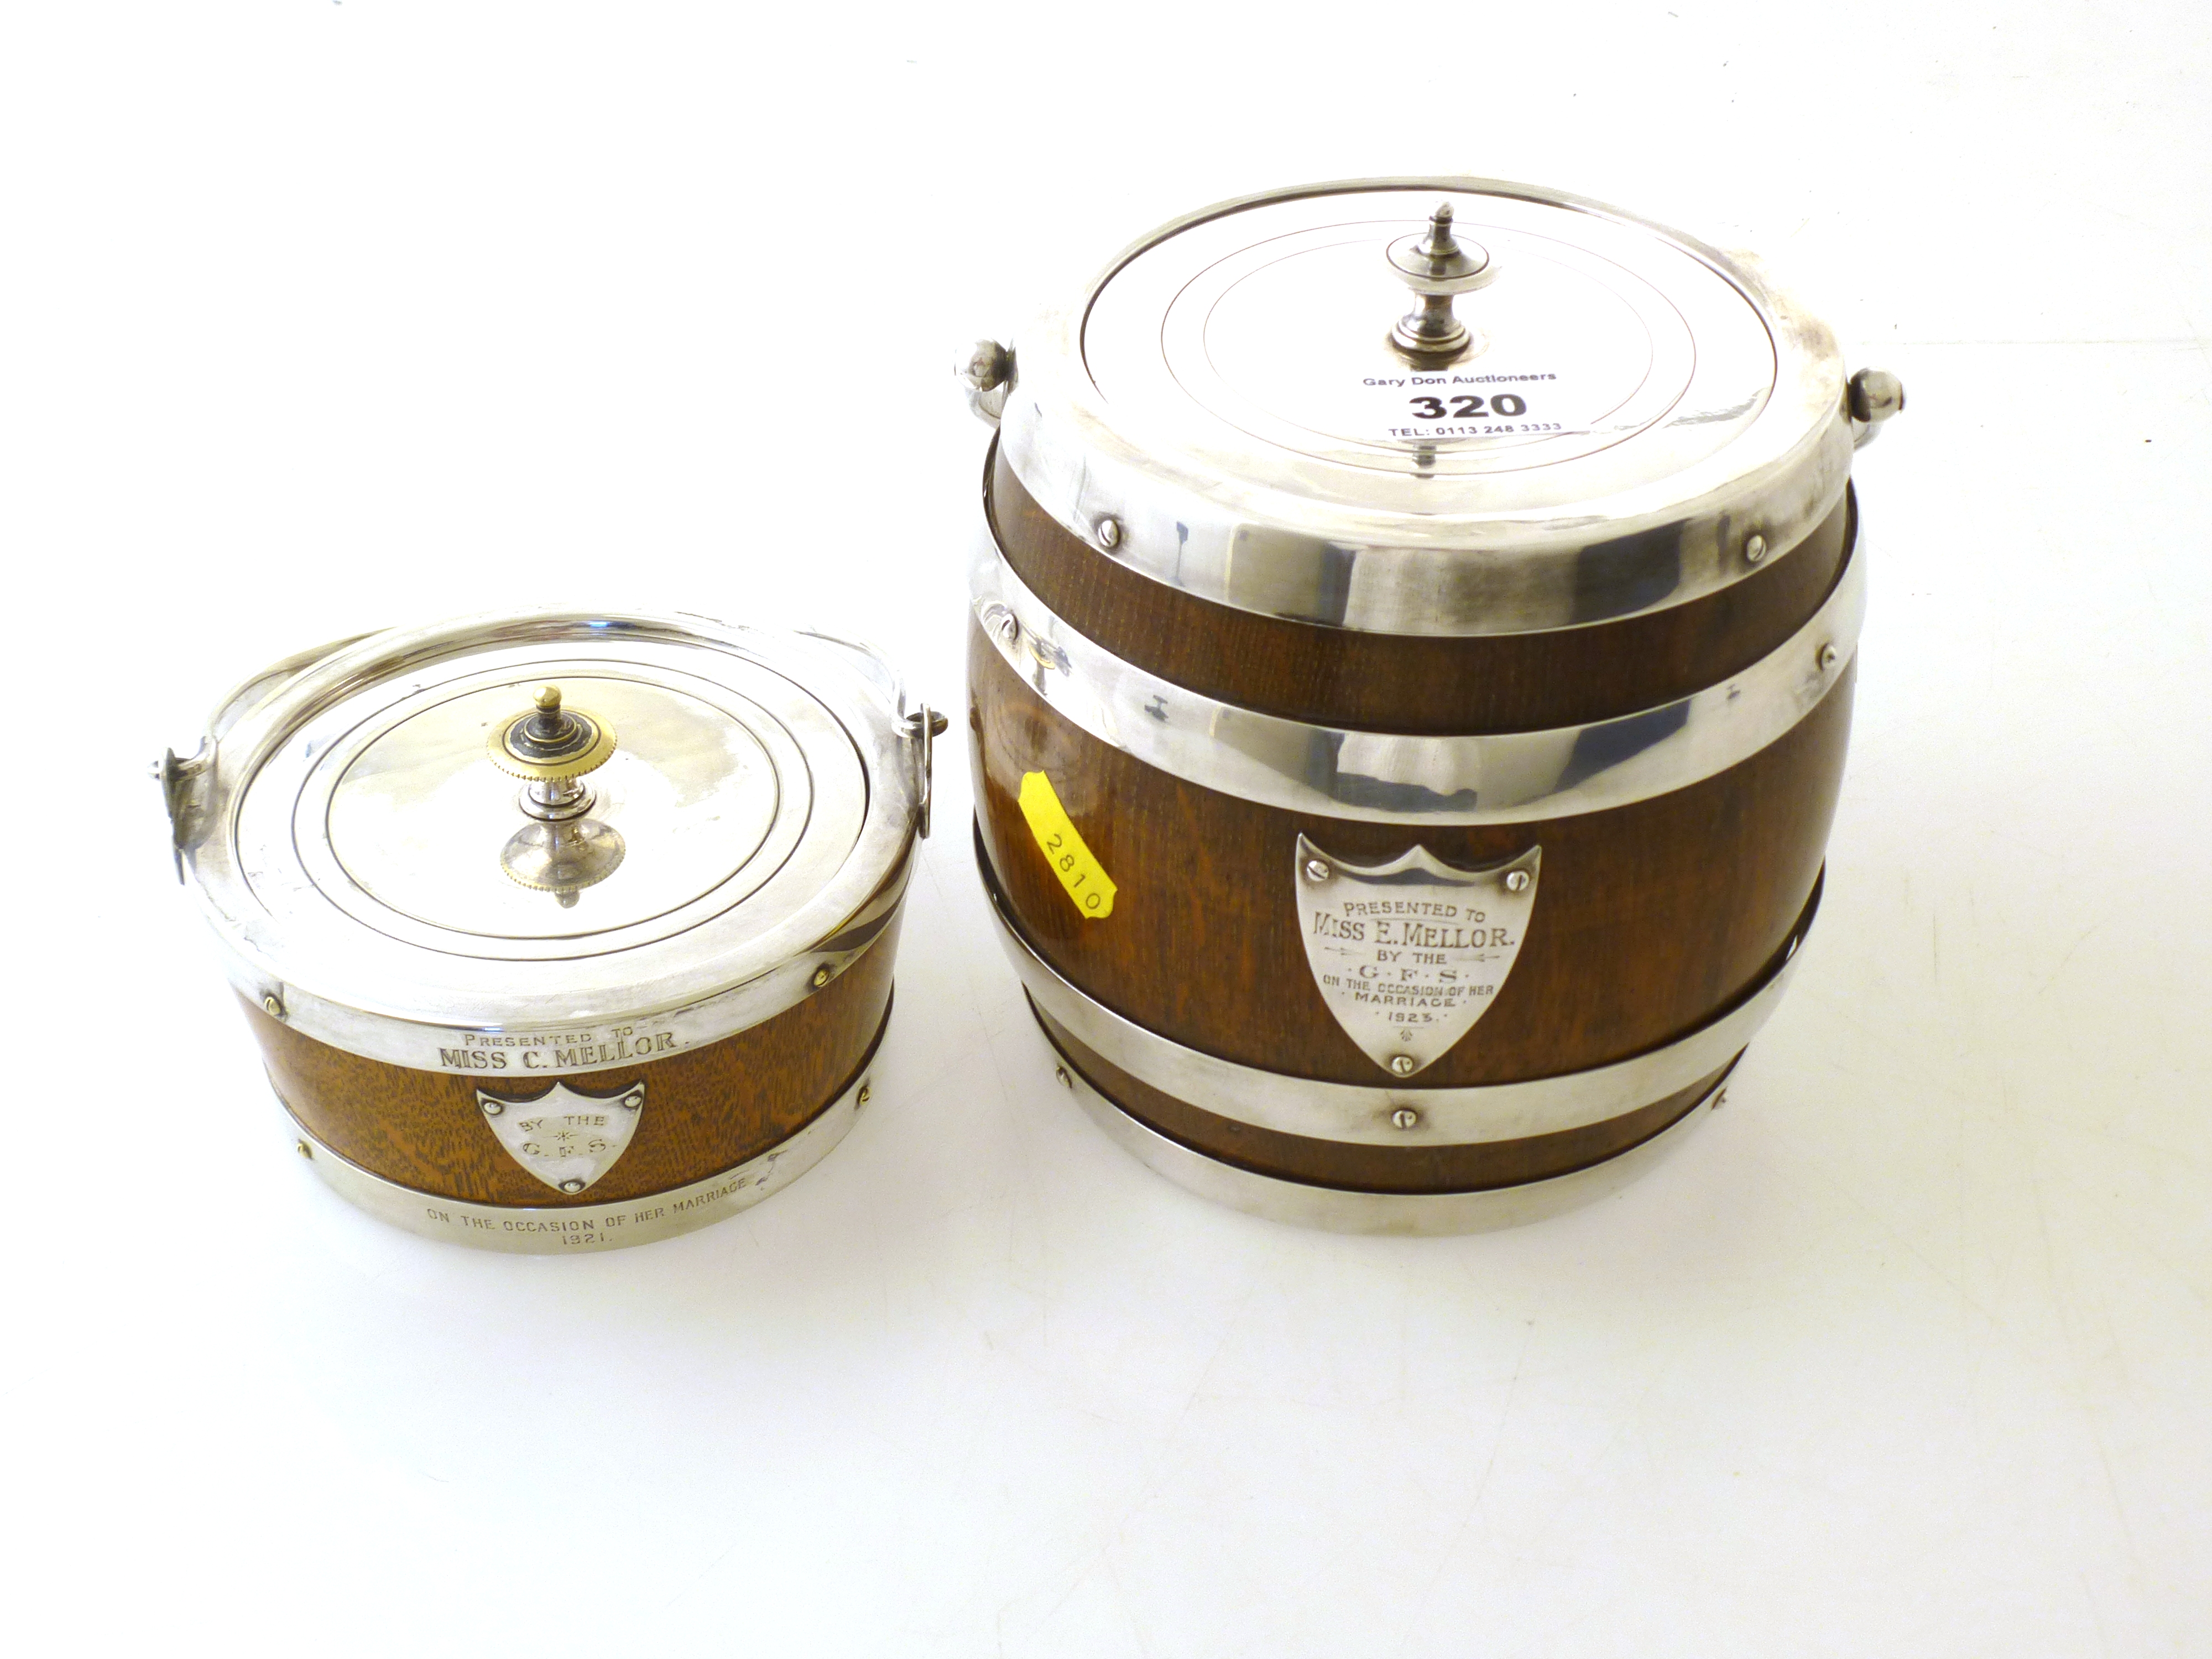 2 BISCUIT BARRELS PRESENTED TO E. MELLOR AND C. MELLOR